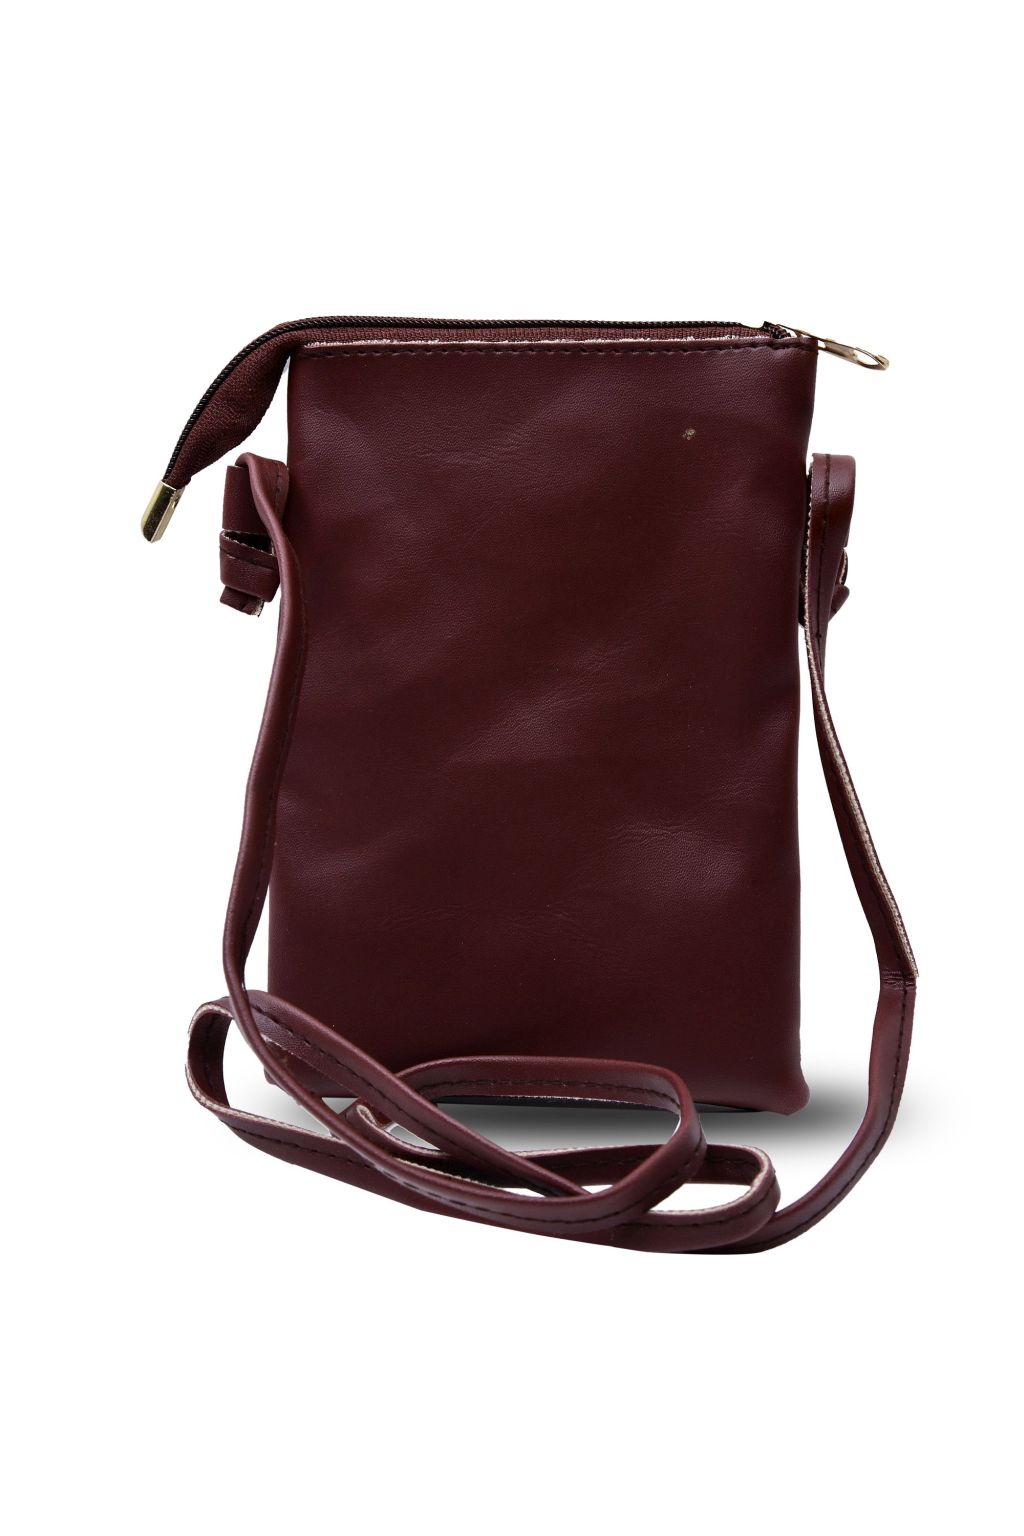 Leather Small Sling Bag for Men - Woosir